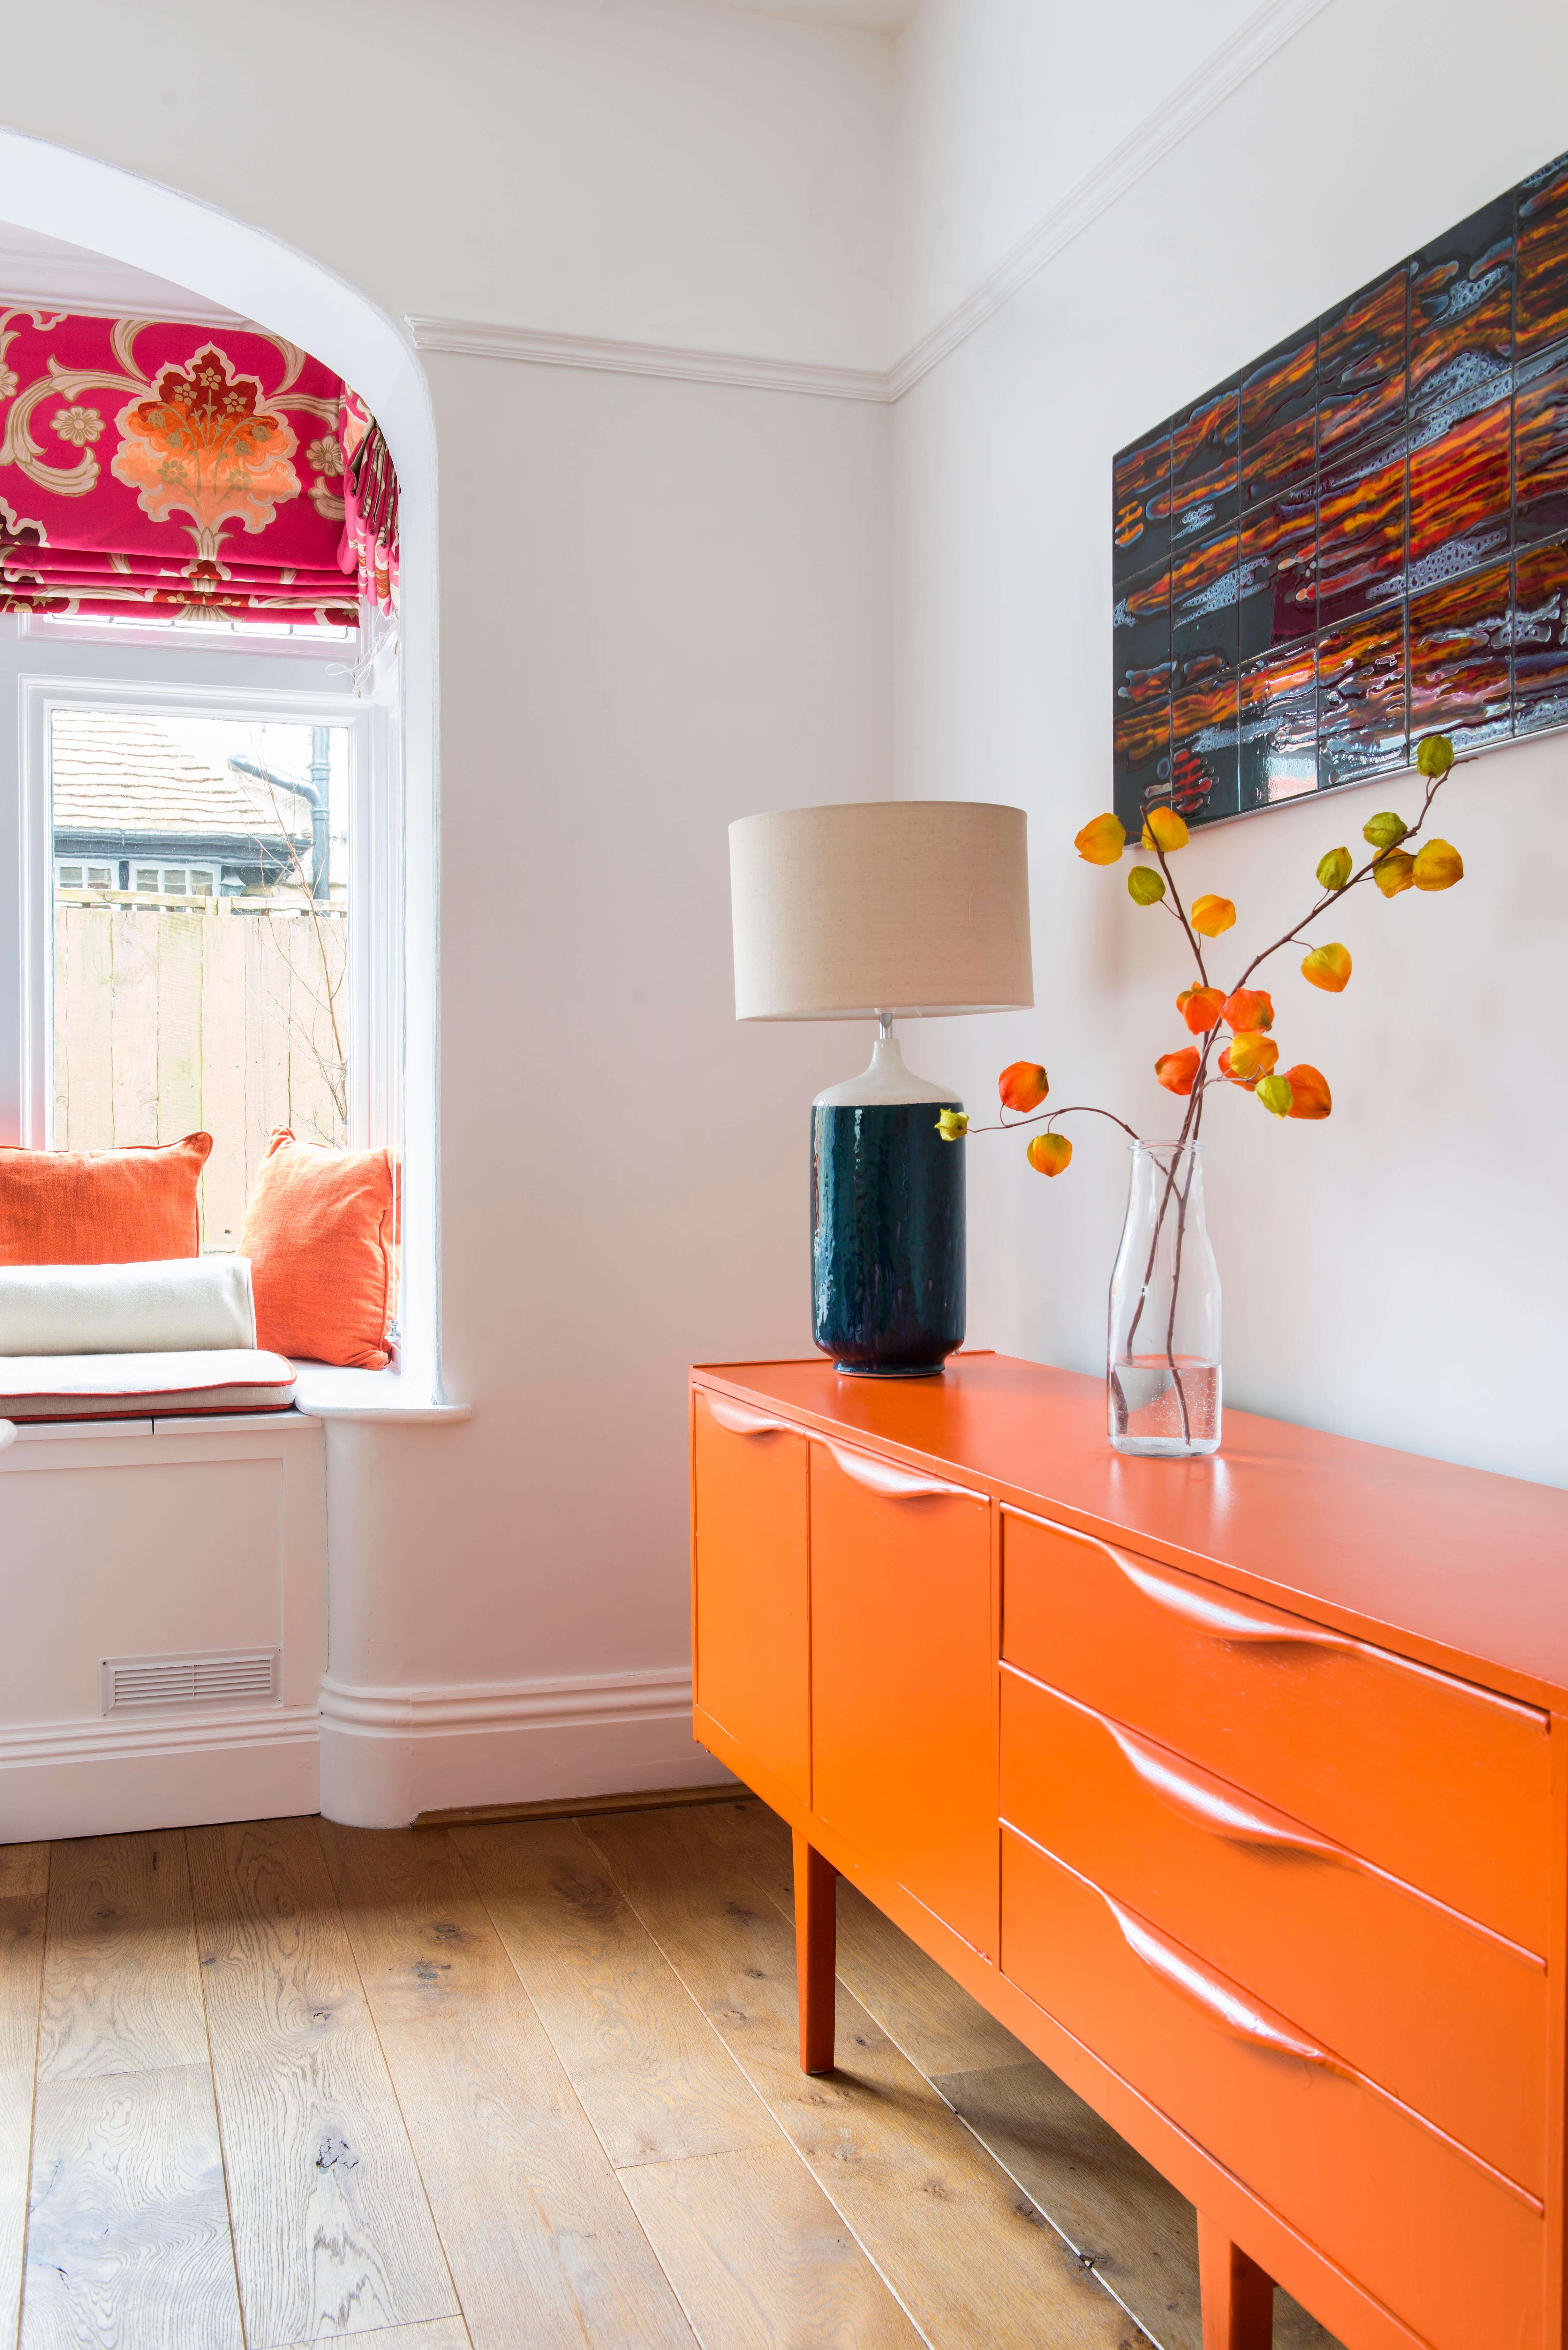 A G plan sideboard was painted a vibrant orange to complement the Designers' Guild blind